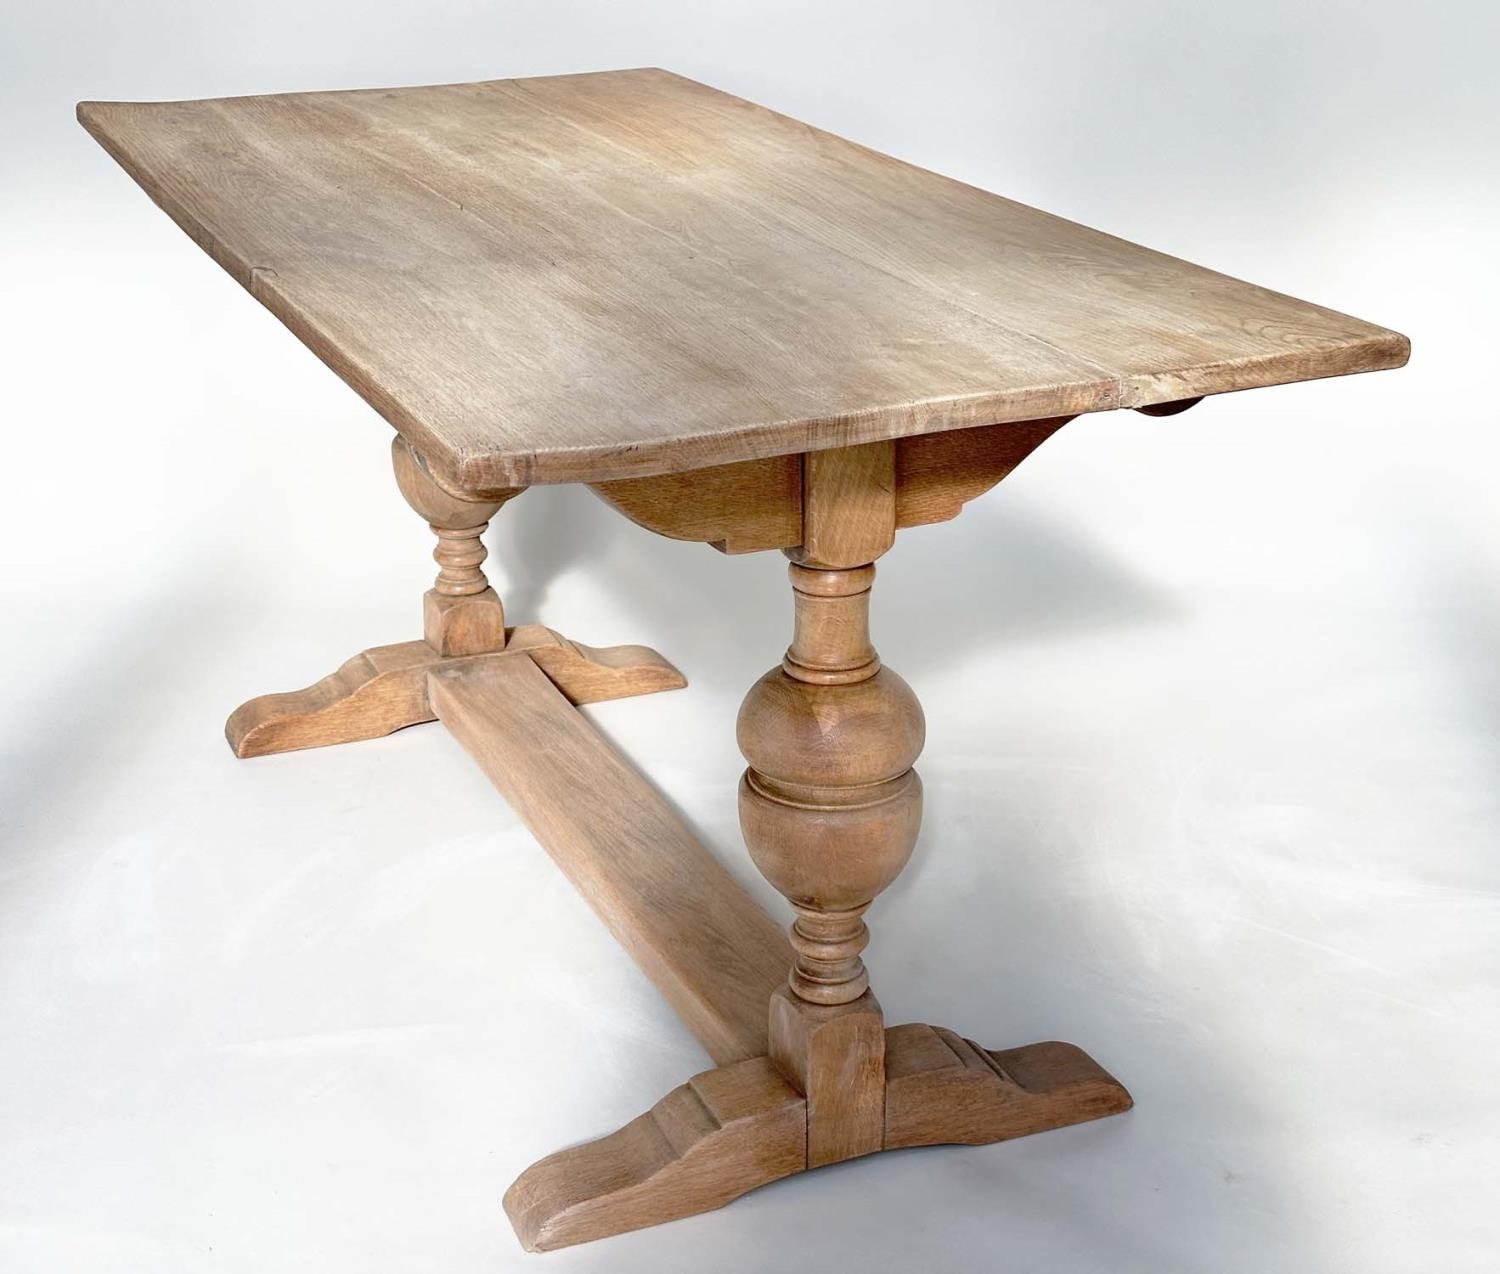 REFECTORY TABLE, early English style oak with planked top, cup and cover turned pillar trestles - Image 6 of 12